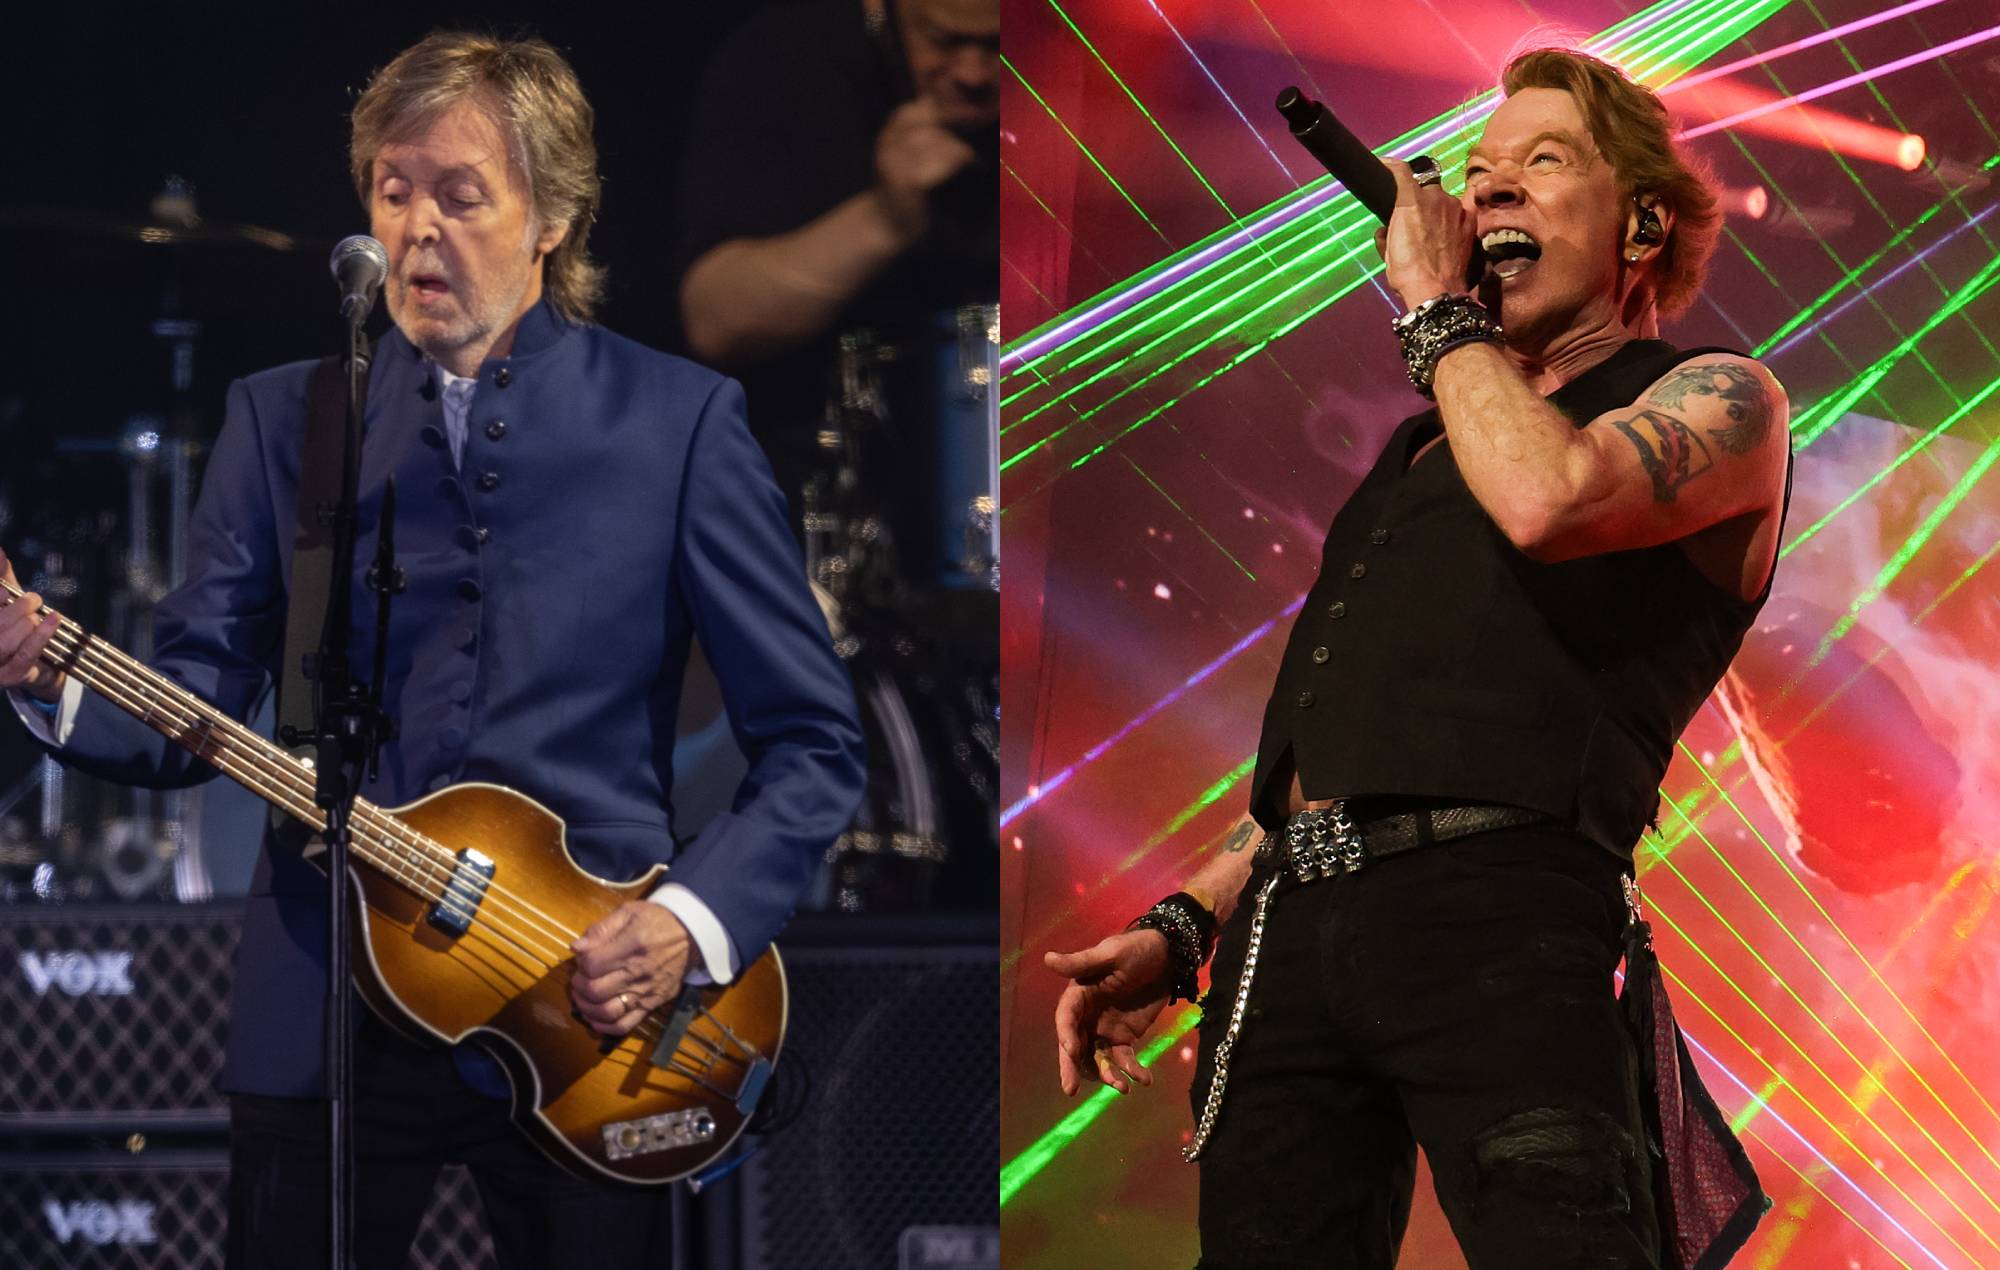 Paul McCartney was “amazed” when Guns ‘N’ Roses covered ‘Live & Let Die’